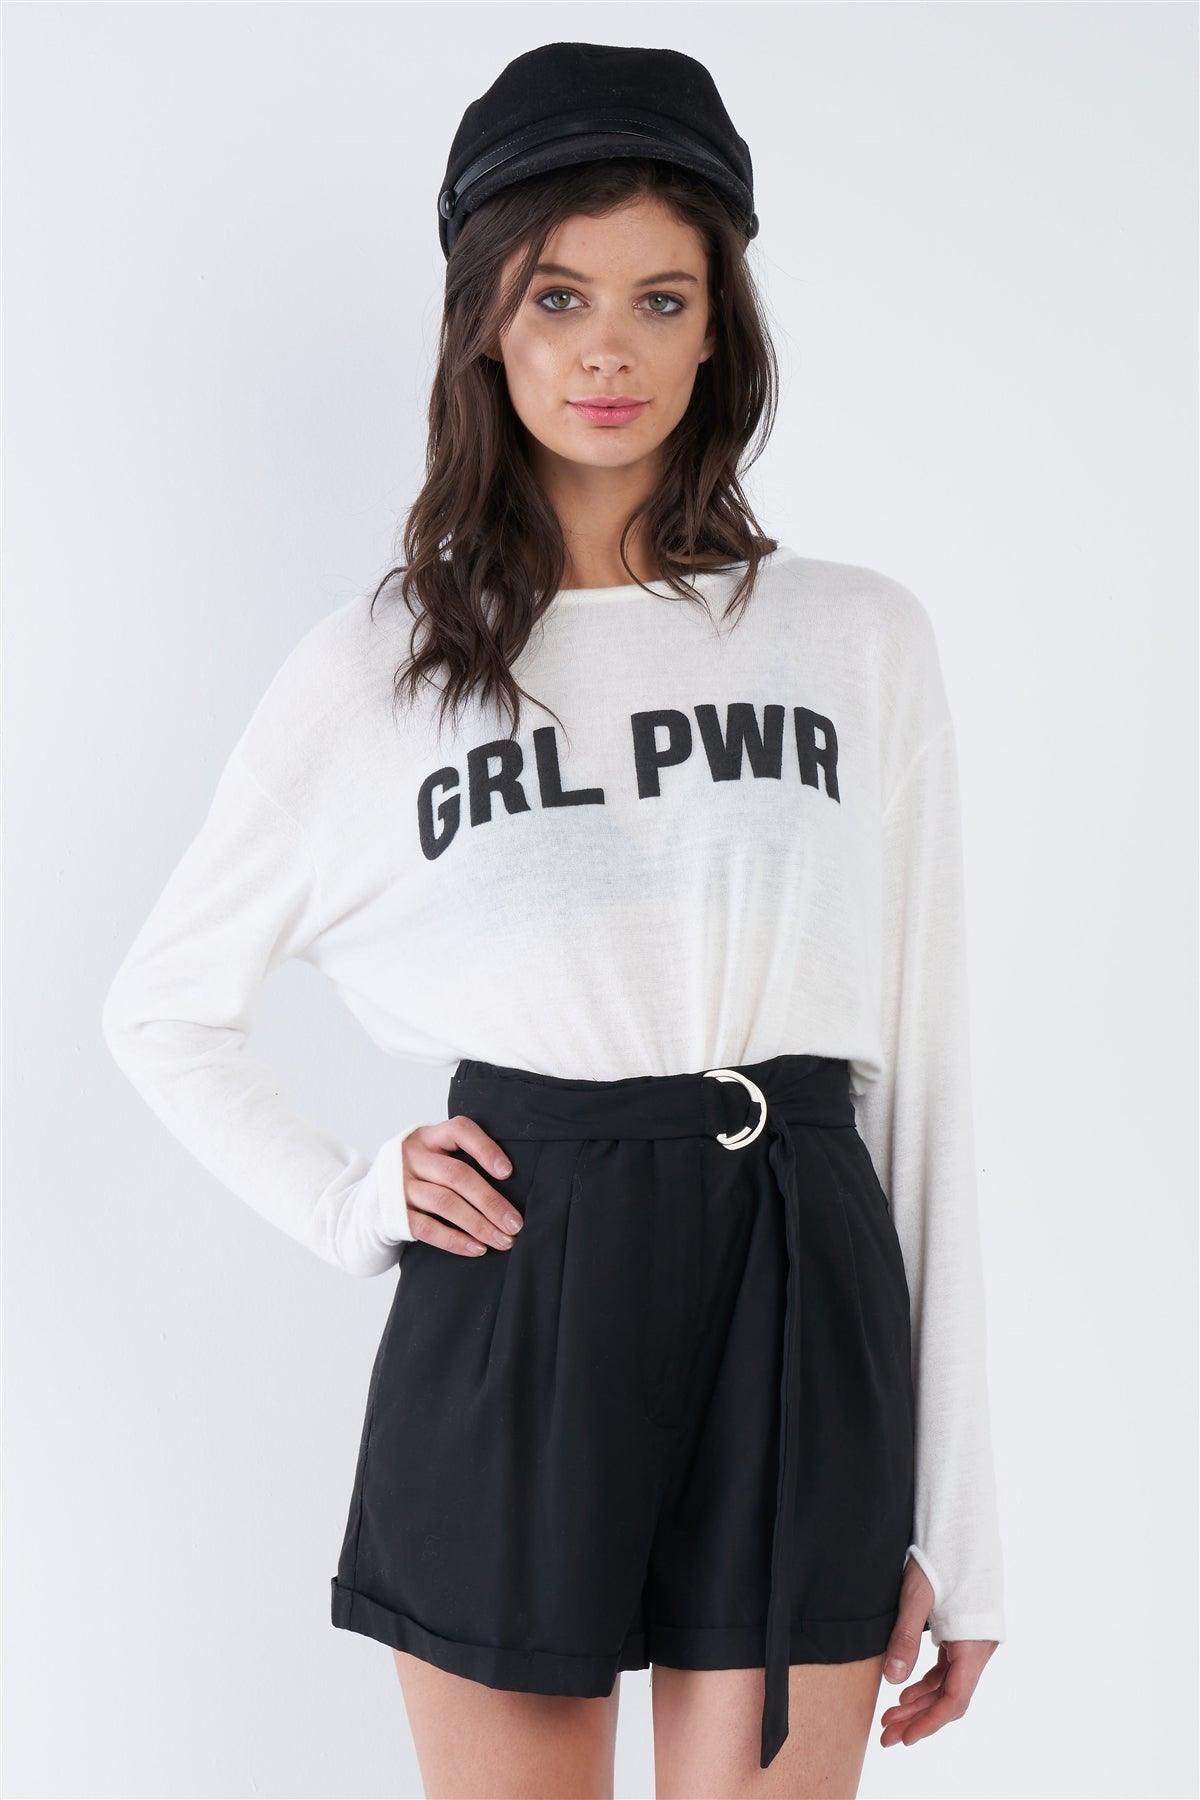 Off-White "GRL PWR" Long Sleeve Thumb Hole Top /3-2-1